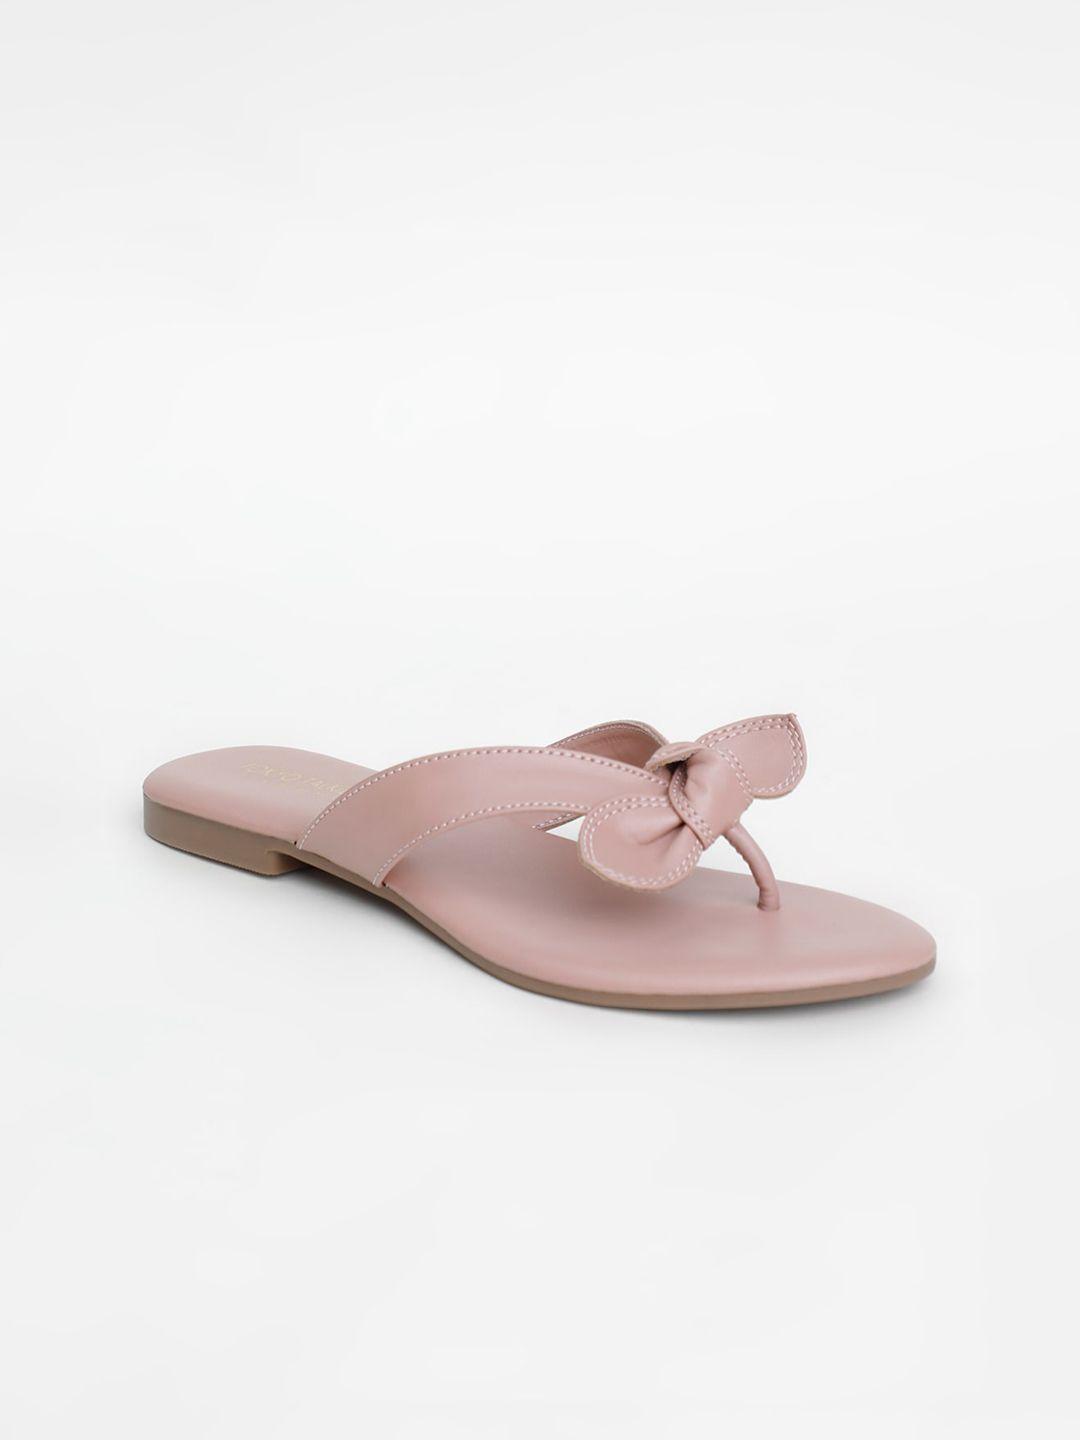 tokyo talkies women pink solid open toe flats with bows